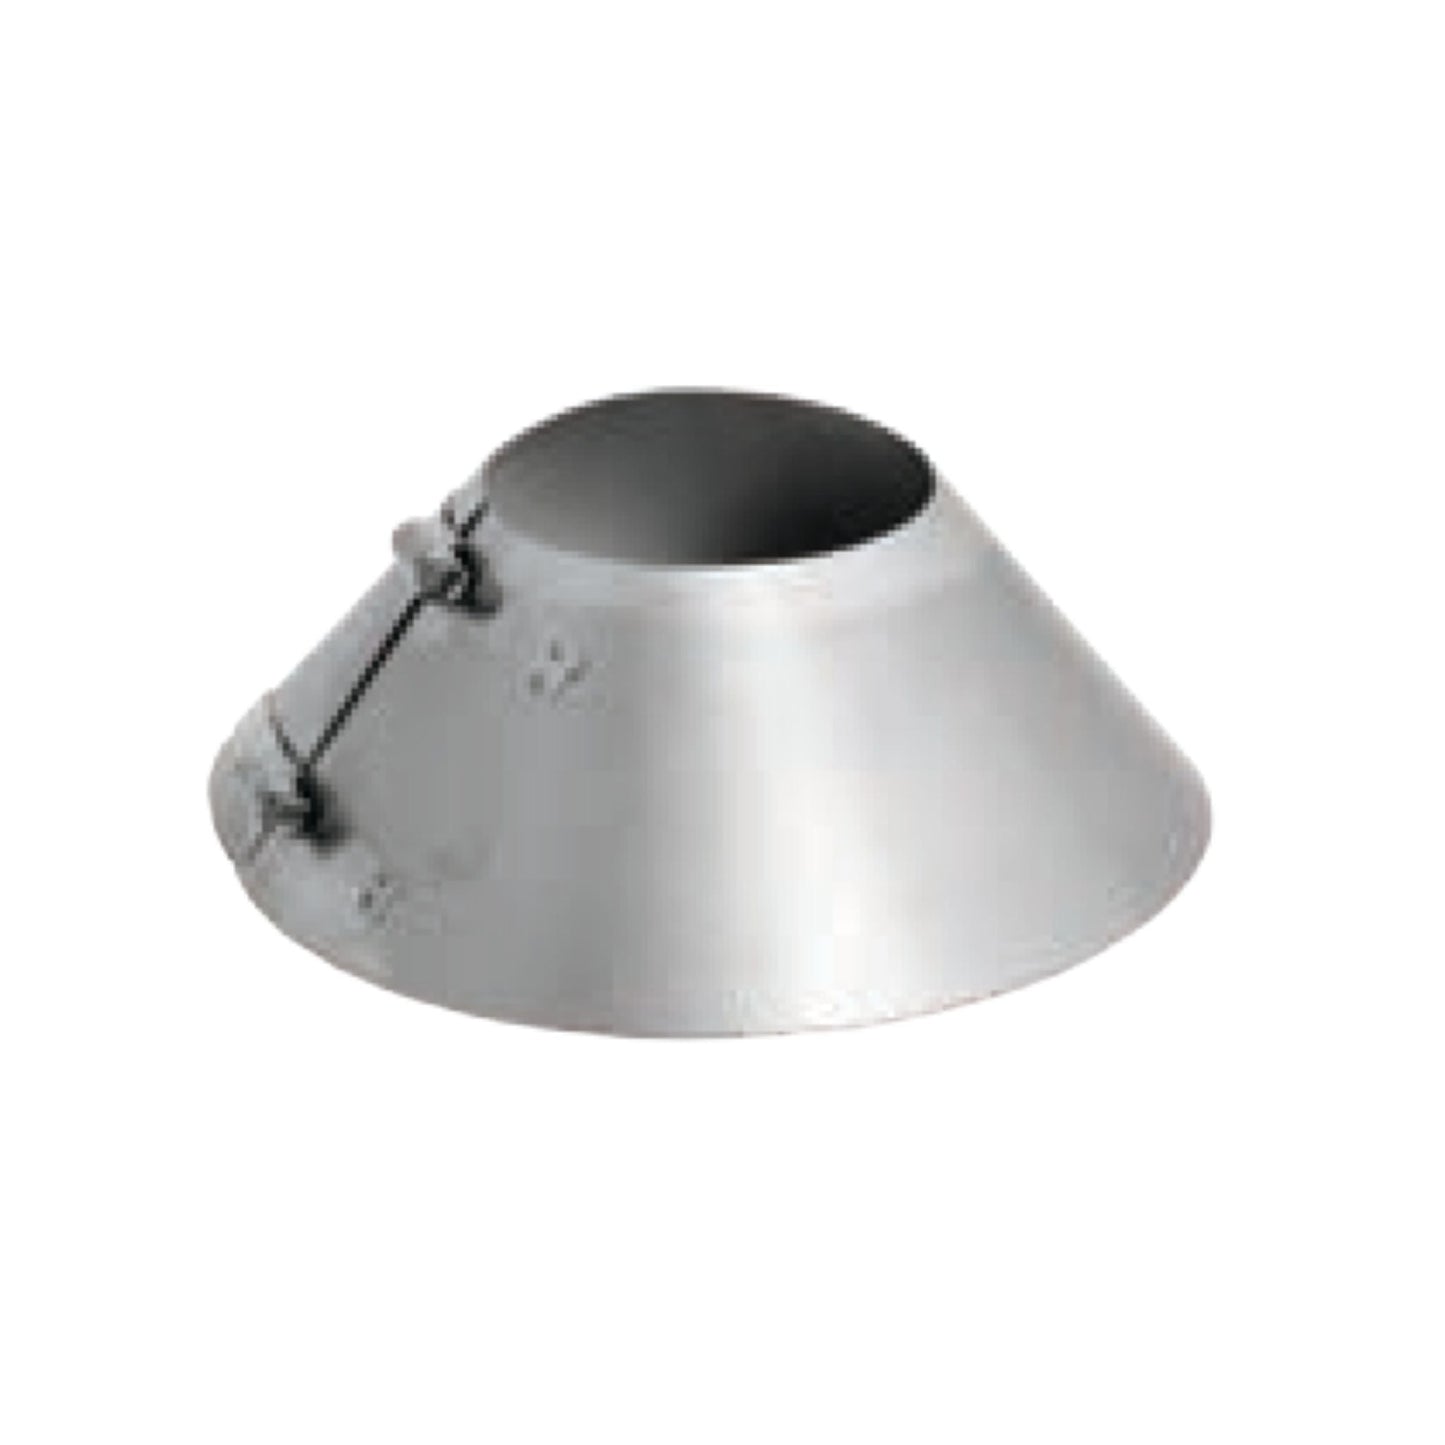 DuraVent FasNSeal 10" 29-4C Stainless Steel Storm Collar